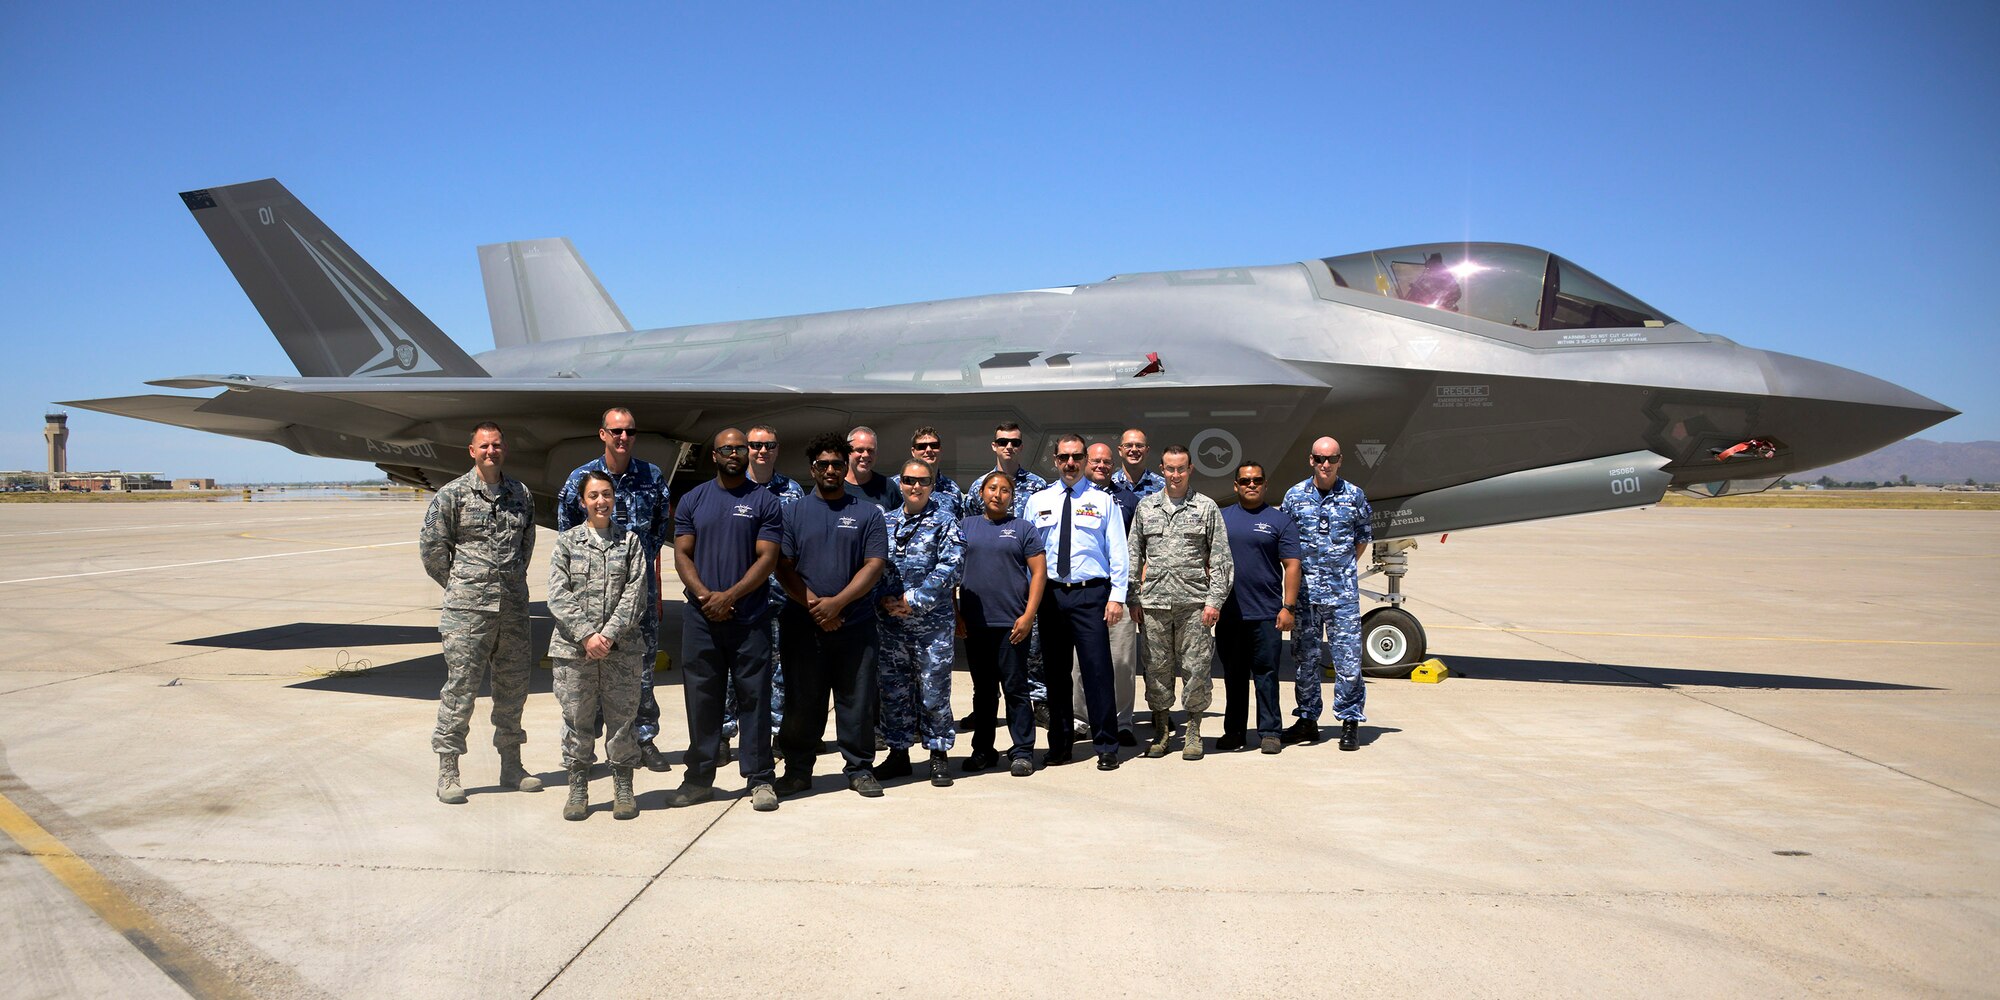 Air Marshal Gavin Davies, Royal Australian Air Force chief, takes a group photo with Australian Airmen and Lockheed Martin maintainers during his visit May 17, 2017, at Luke Air Force Base, Ariz. Davies visited Luke to learn about ongoing and future activities regarding F-35 pilot training and maintenance. (U.S. Air Force photo by Senior Airman Devante Williams)